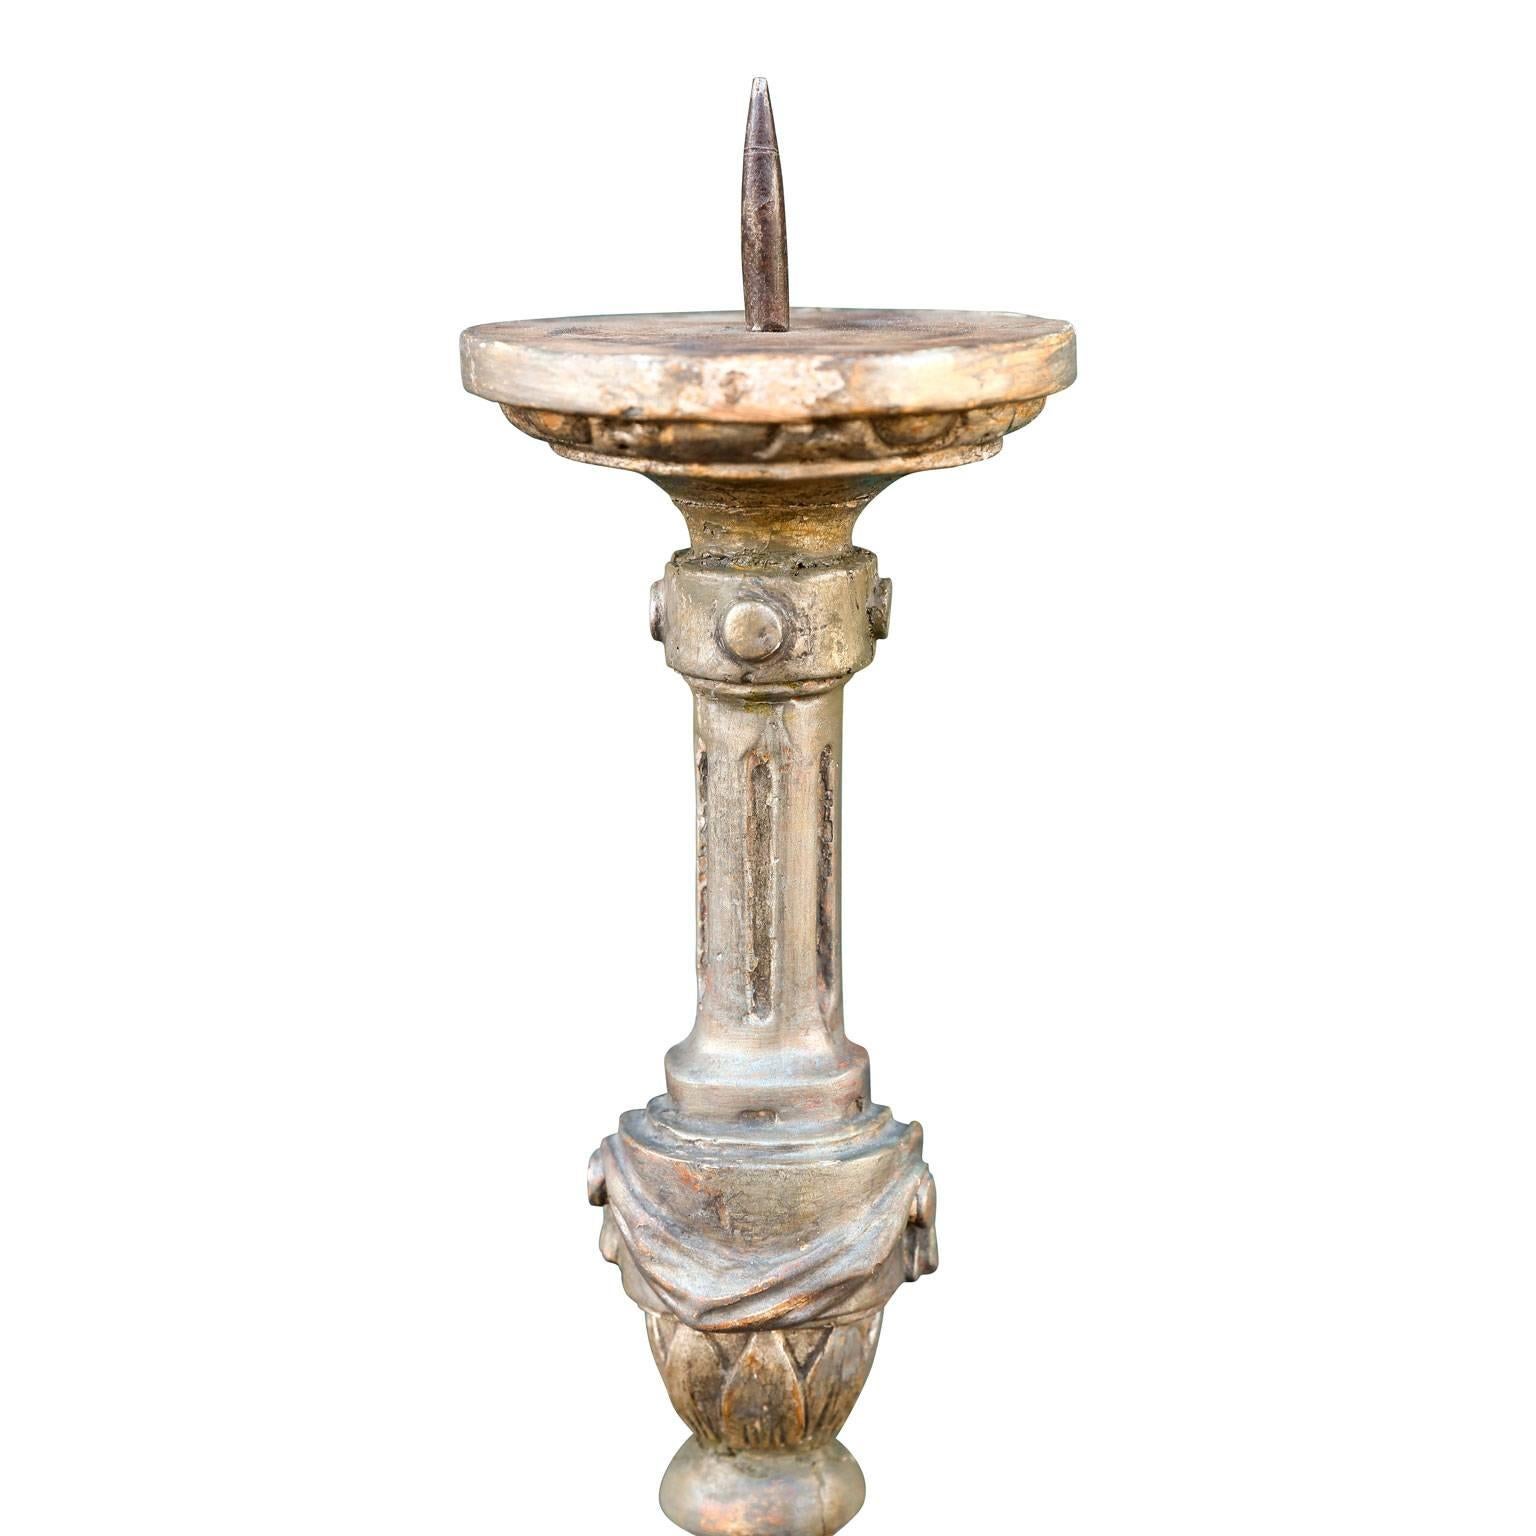 Early 19th century French giltwood one-sided candlestick carved in the neoclassical style.